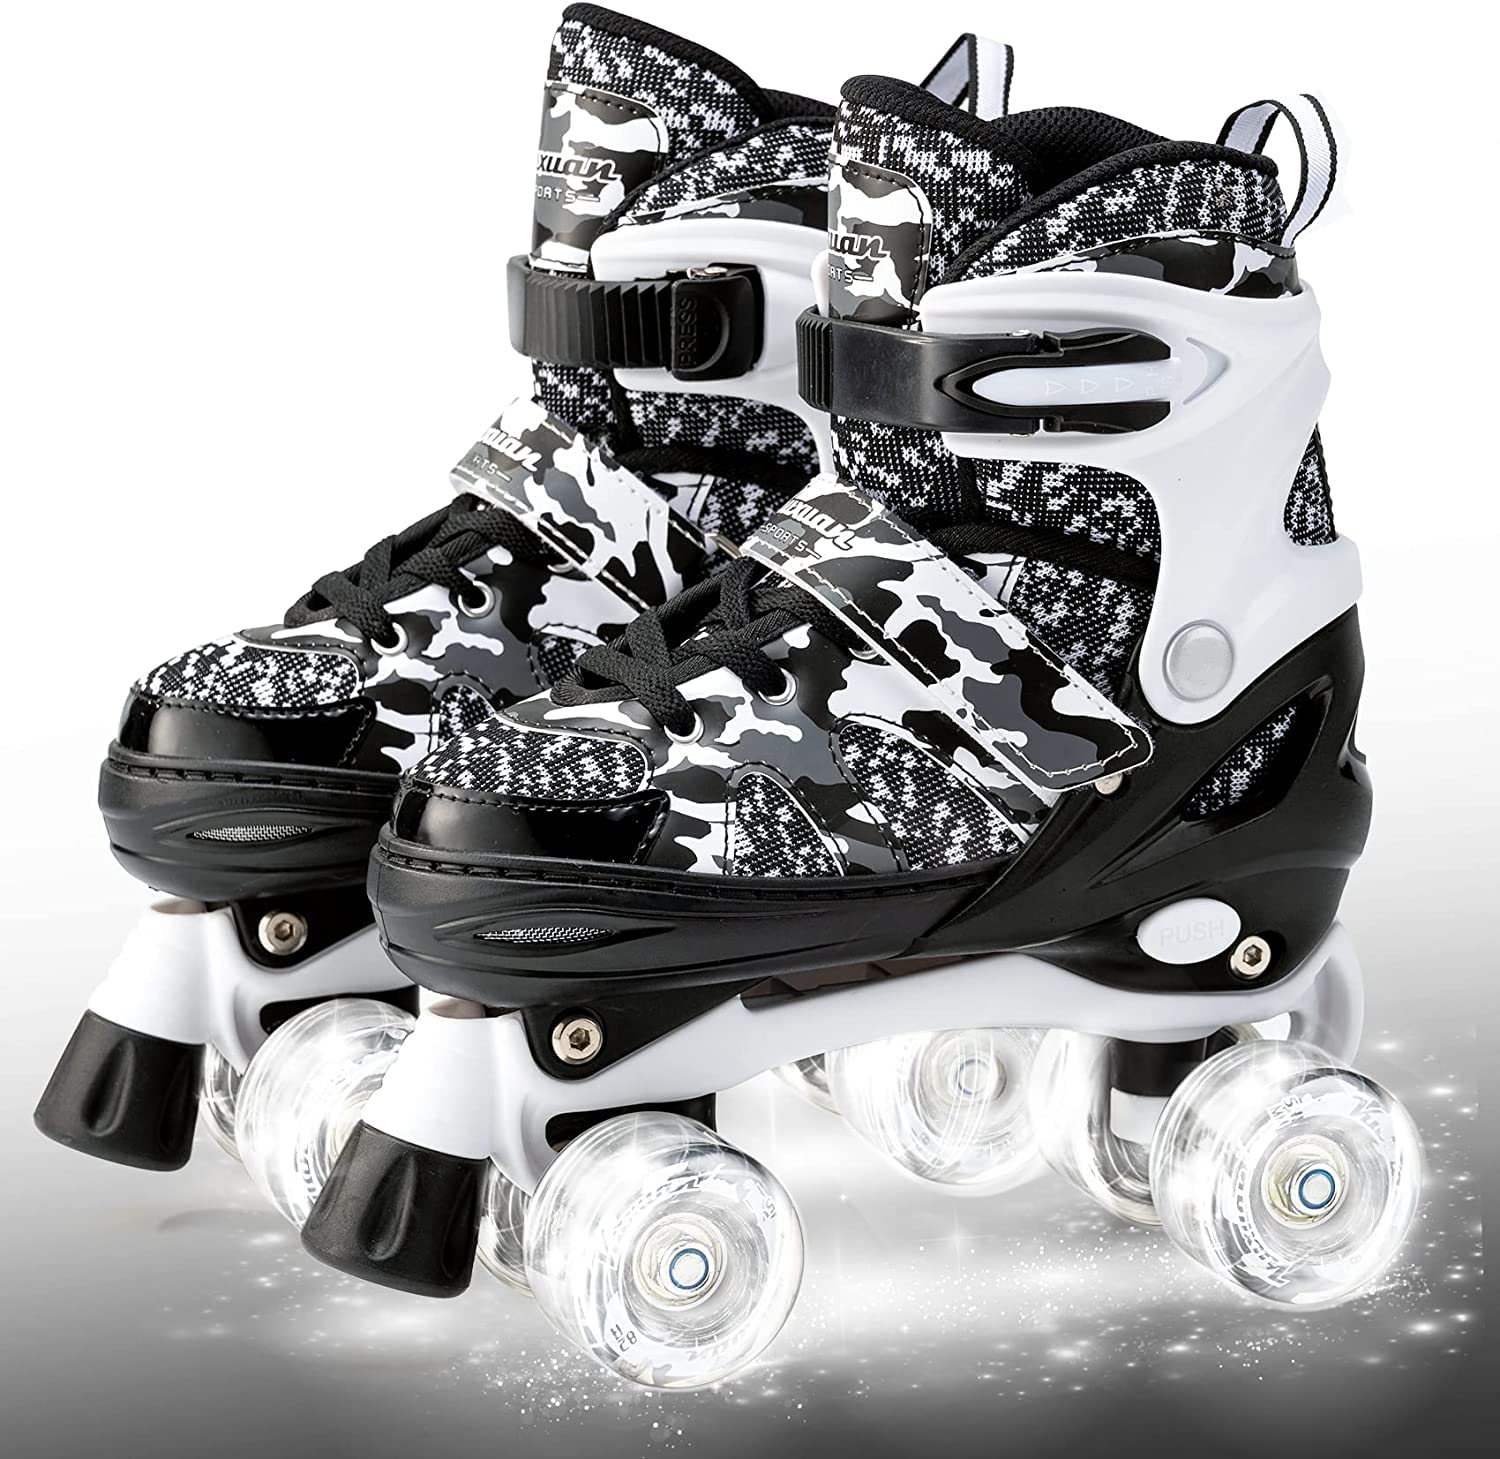 Kuxuan Skates Boys and Girls Adjustable Roller Skates with Light up Wheels, Fun Illuminating Skate for Kids Youth